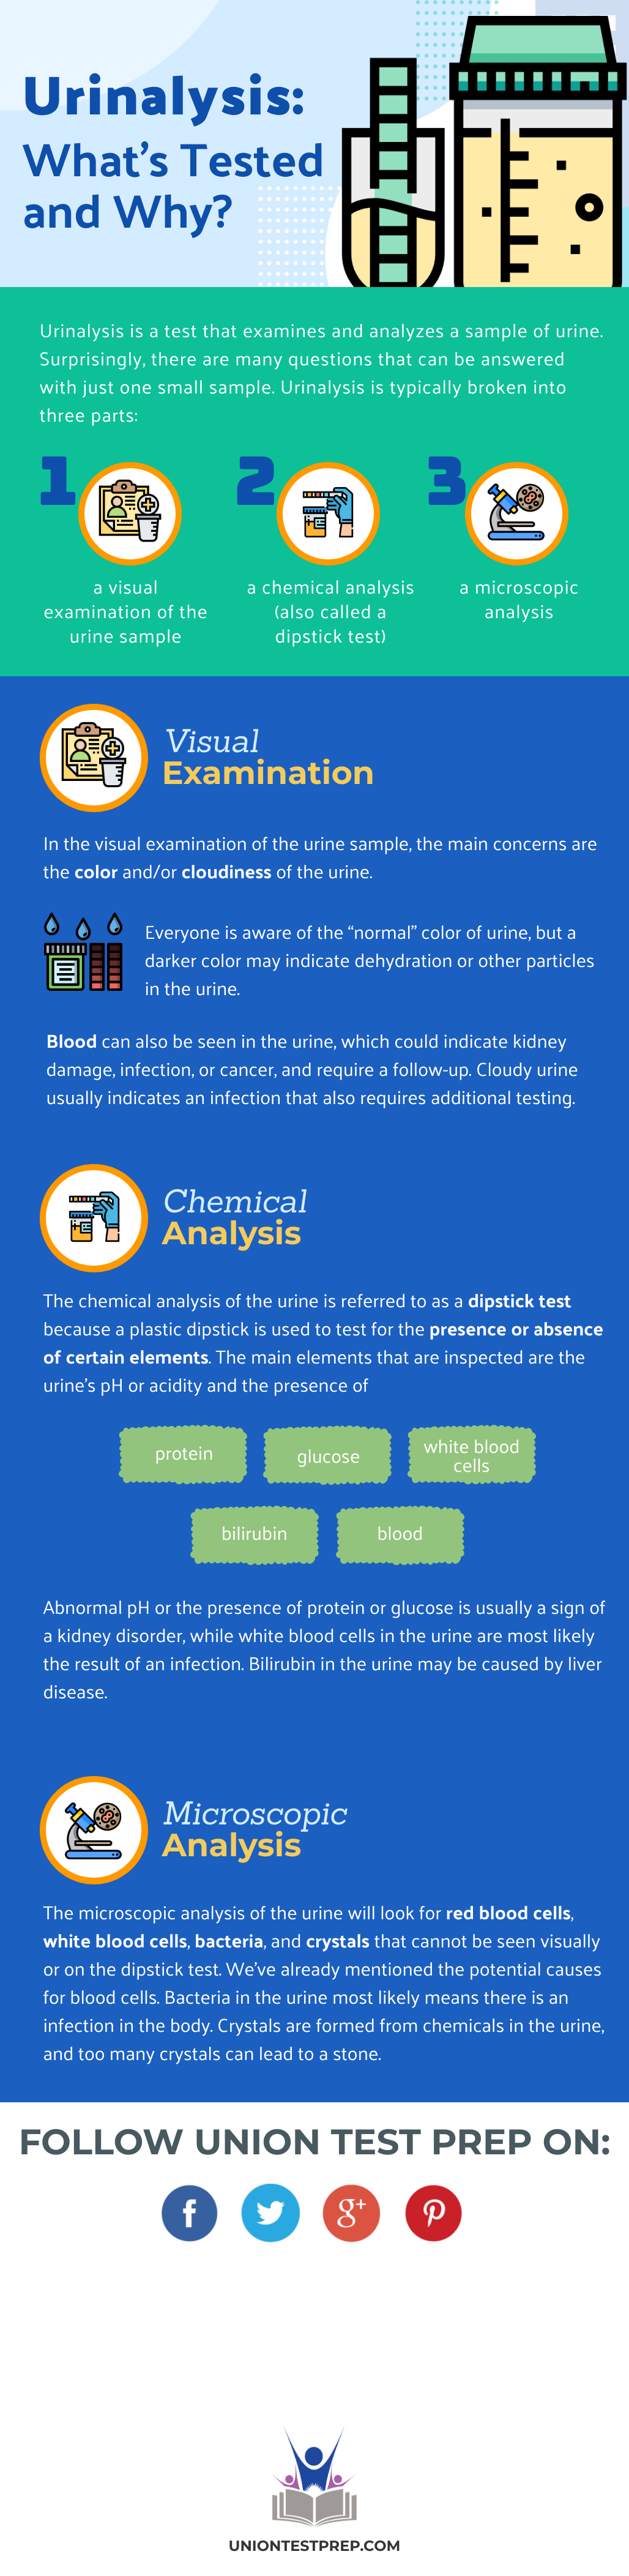 Urinalysis What's Tested